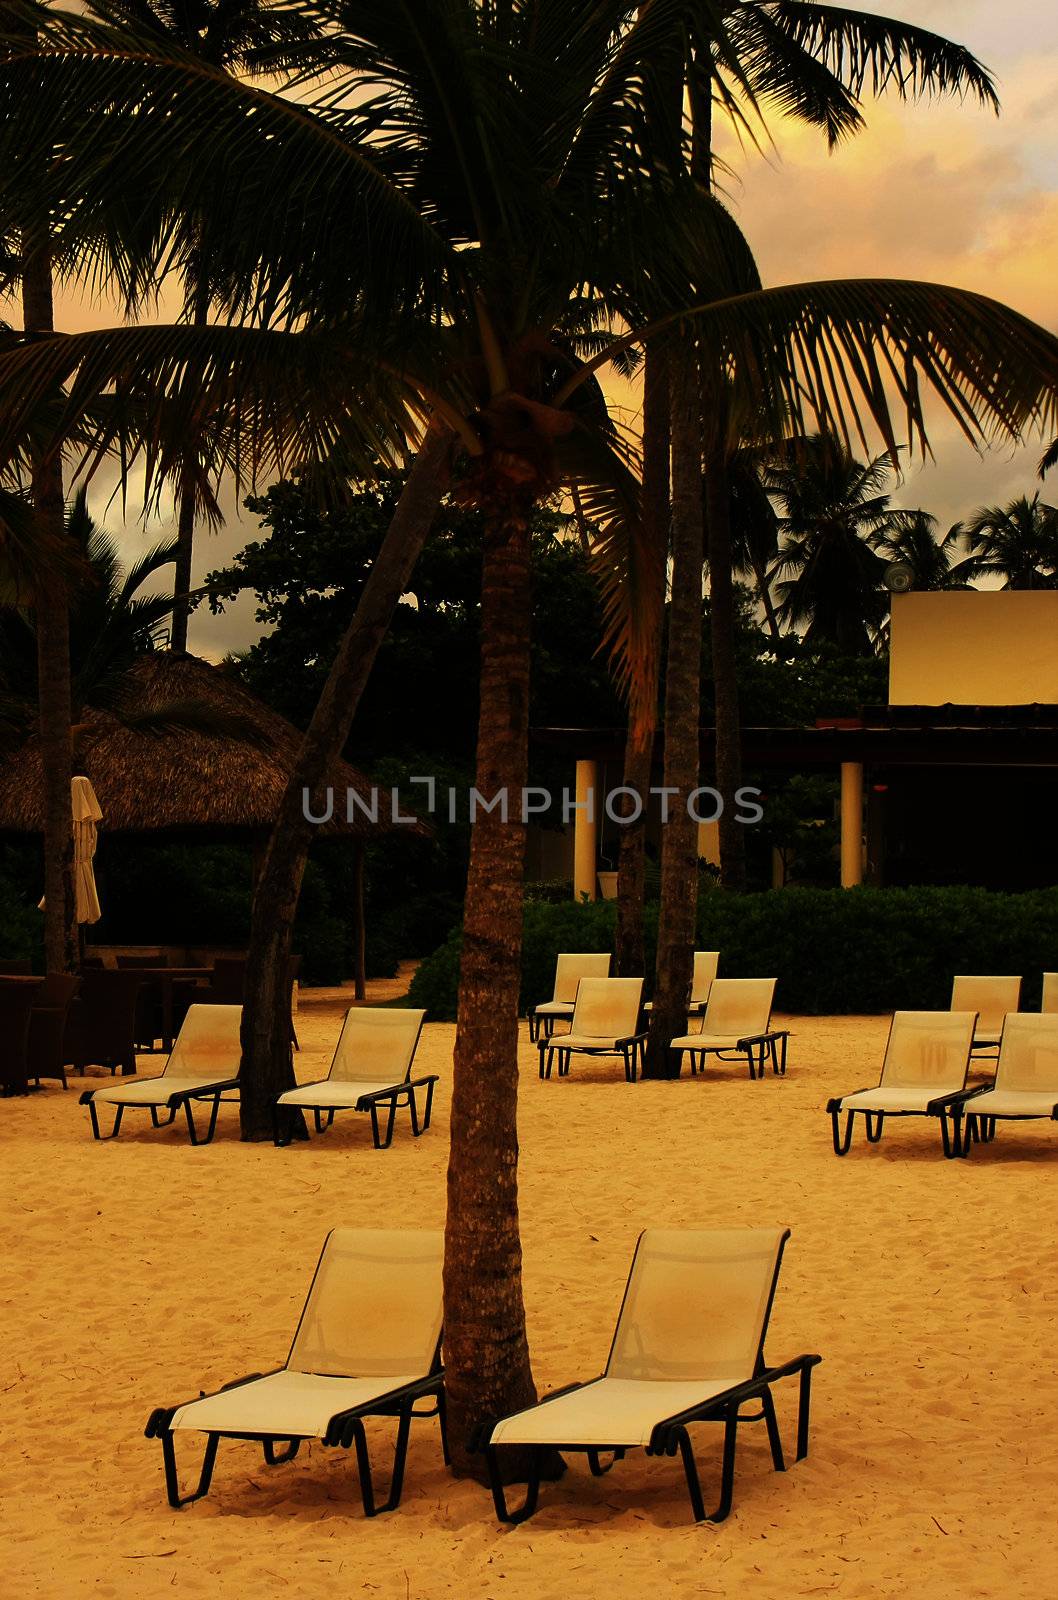 Beach chairs and palm trees on a beach